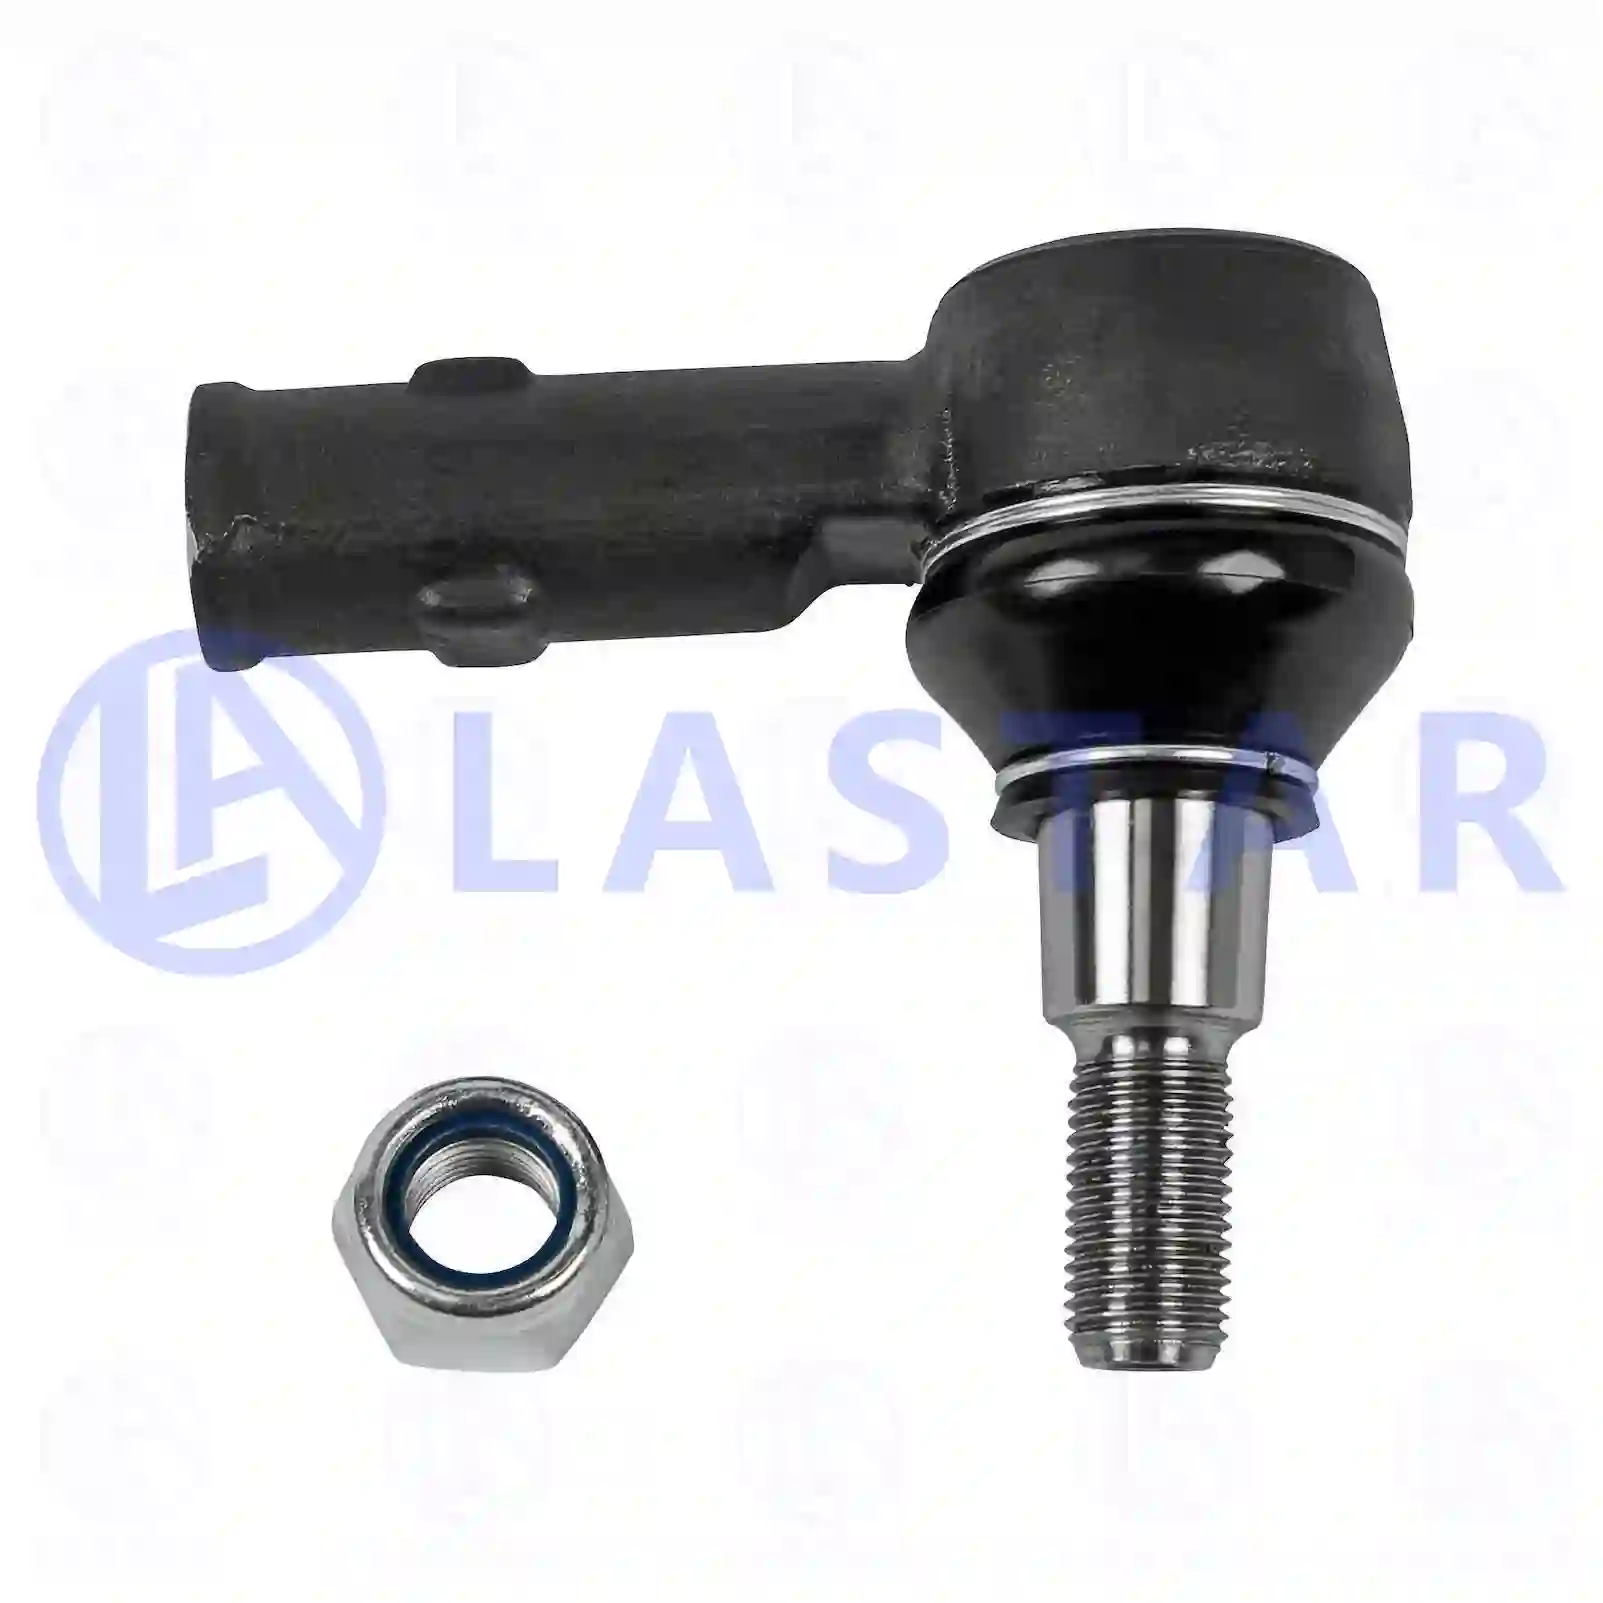 Ball joint, right hand thread, 77705300, 42534911, ZG40413-0008 ||  77705300 Lastar Spare Part | Truck Spare Parts, Auotomotive Spare Parts Ball joint, right hand thread, 77705300, 42534911, ZG40413-0008 ||  77705300 Lastar Spare Part | Truck Spare Parts, Auotomotive Spare Parts